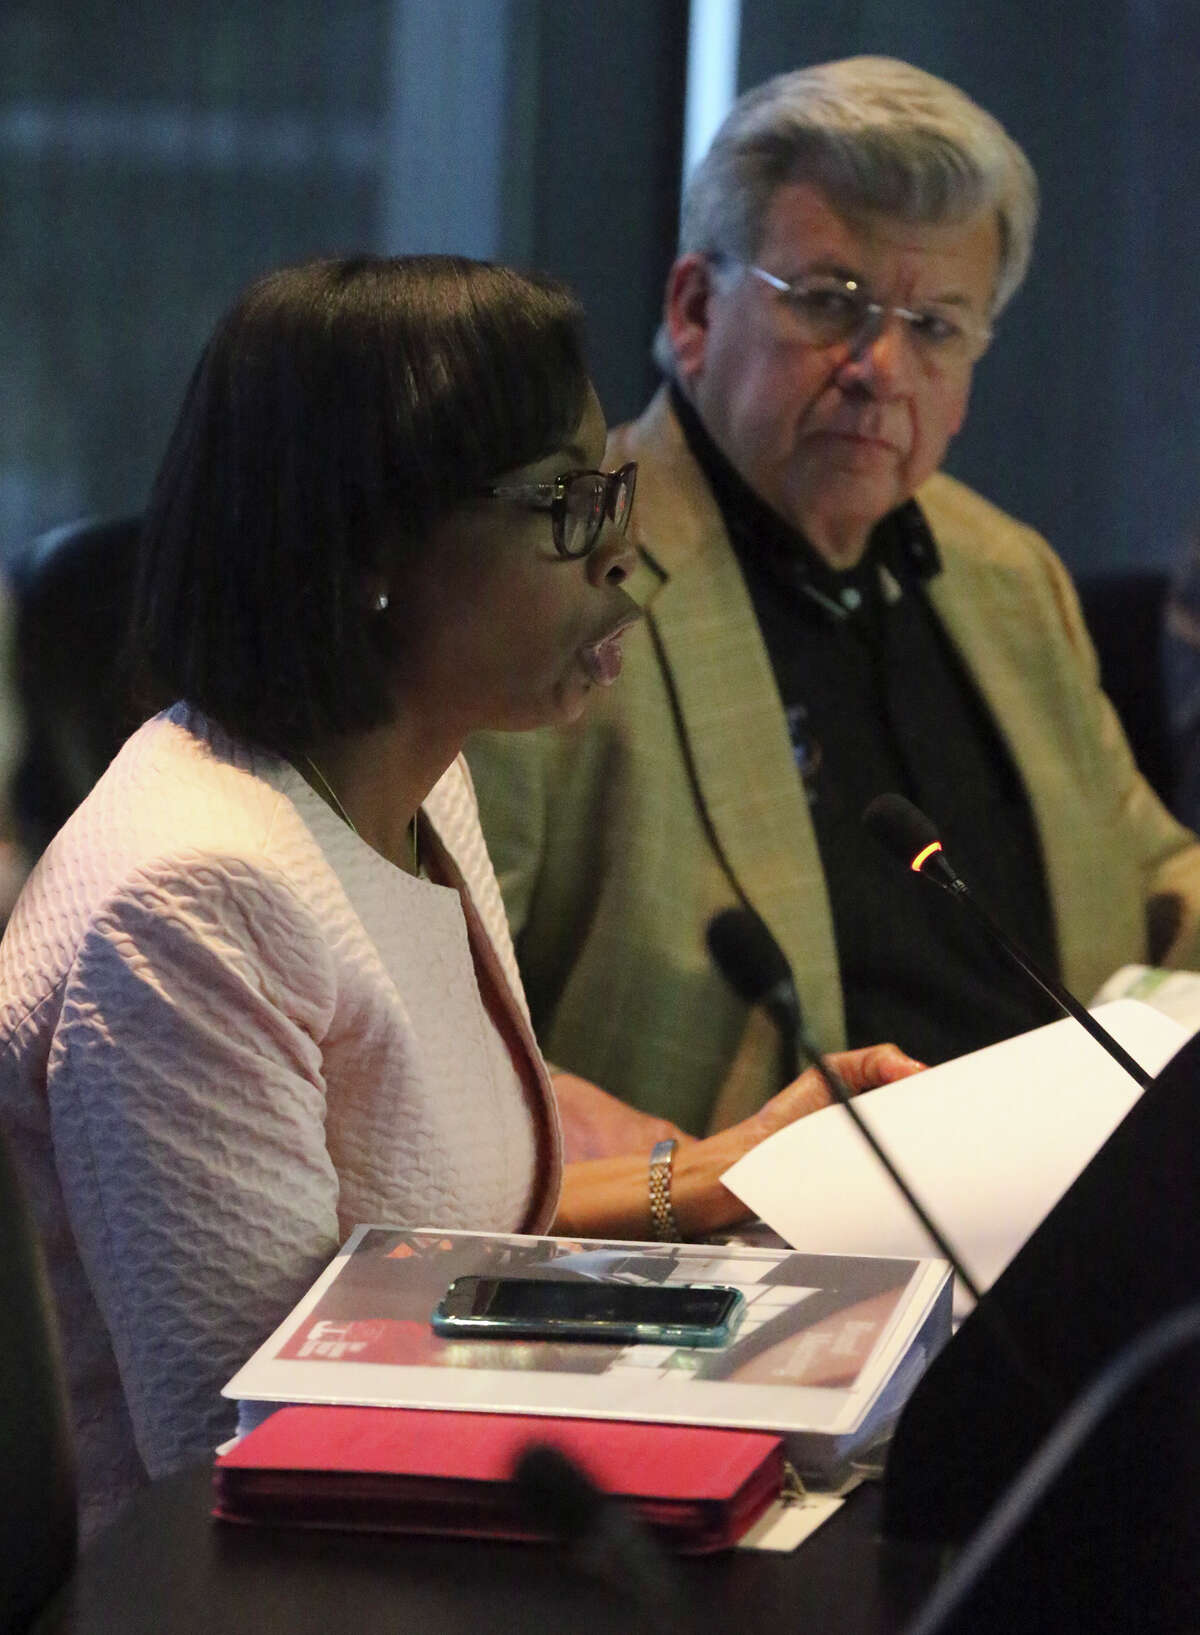 San Antonio Mayor Ivy Taylor (foreground) speaks Tuesday at the San Antonio Water Board of Trustees meeting regarding Garney Construction's plan to buy 80 percent of Abengoa's stake in the Vista Ridge pipeline. In the background is Berto Guerra Jr., chairman of the SAWS Board of Trustees.